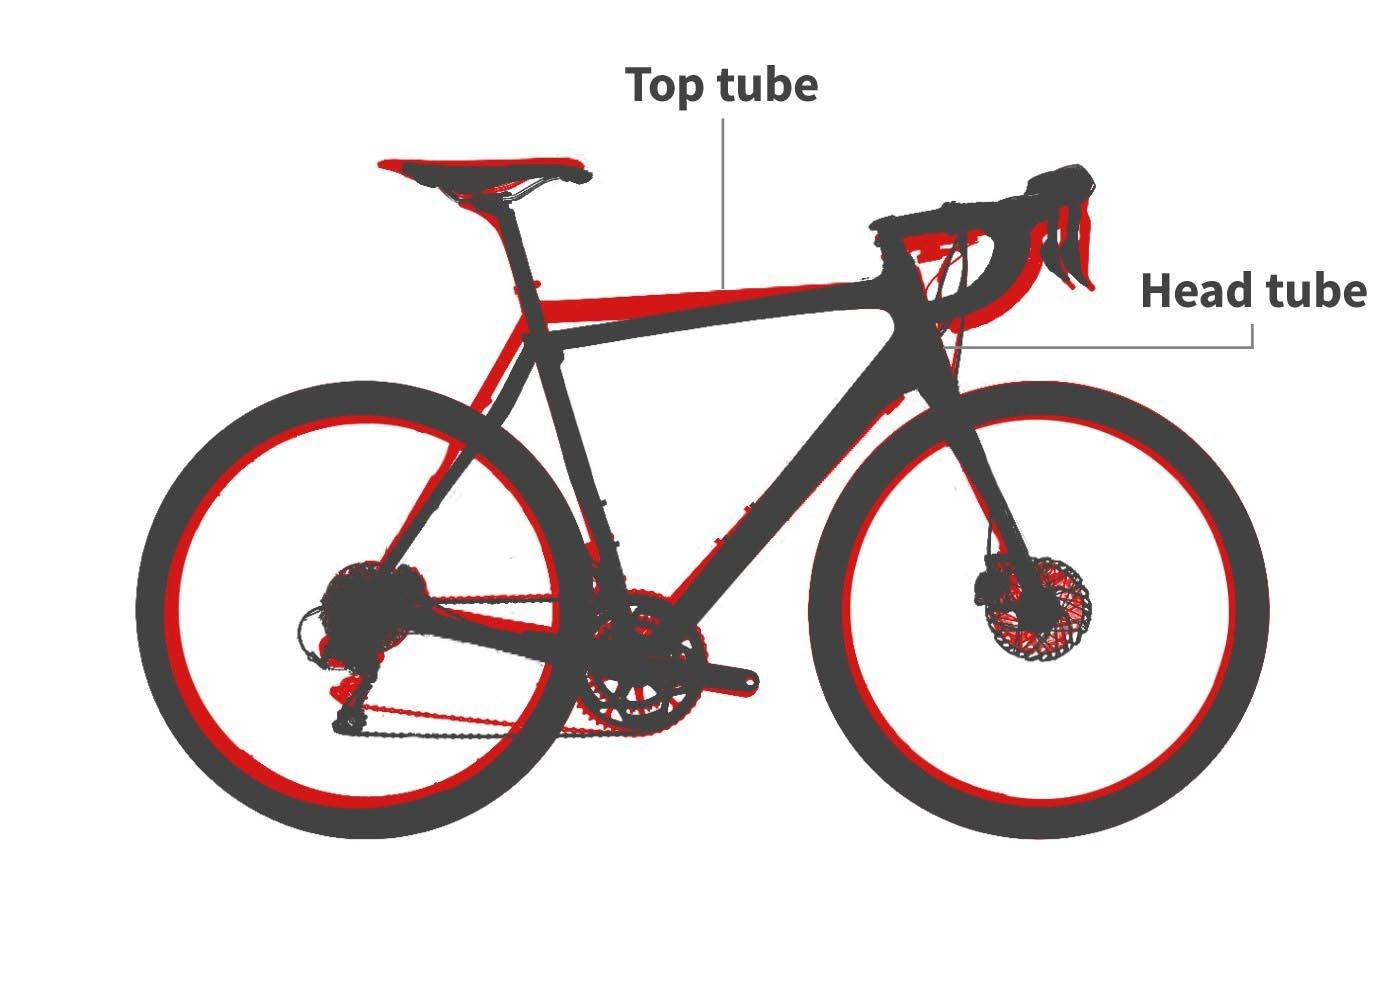 Comparison of racing and endurance road bikes